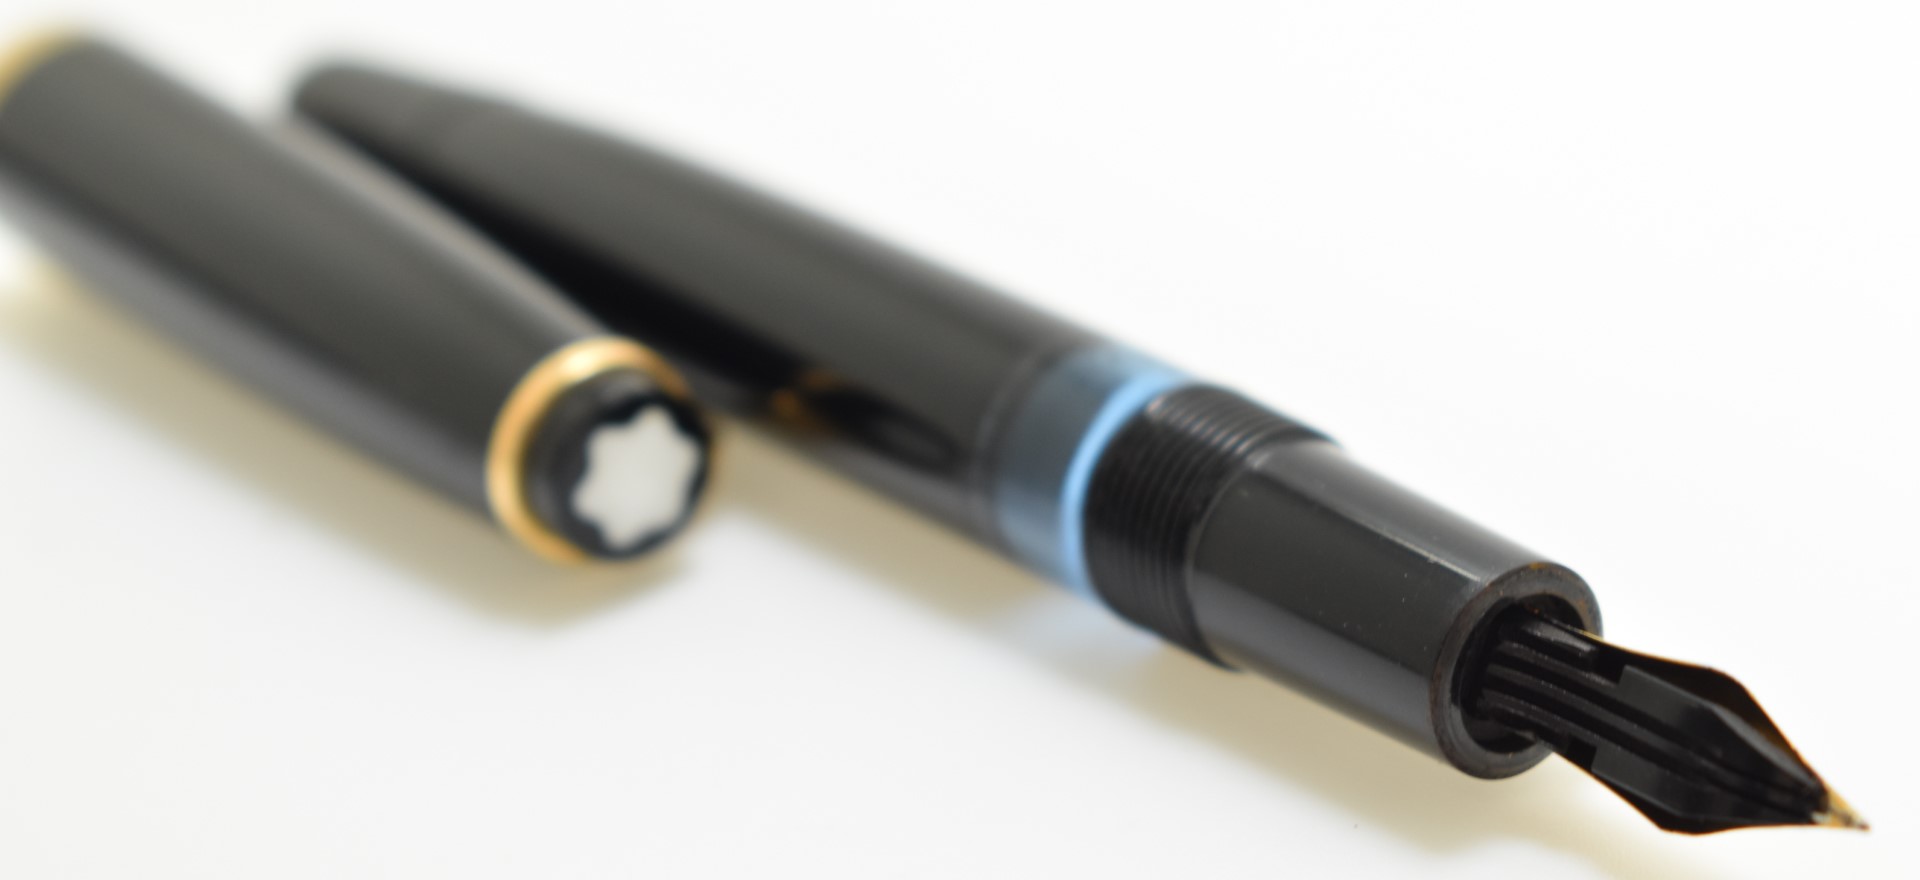 Montblanc 342 fountain pen with number 2 nib, black resin body and gold plated fittings, in original - Image 9 of 10